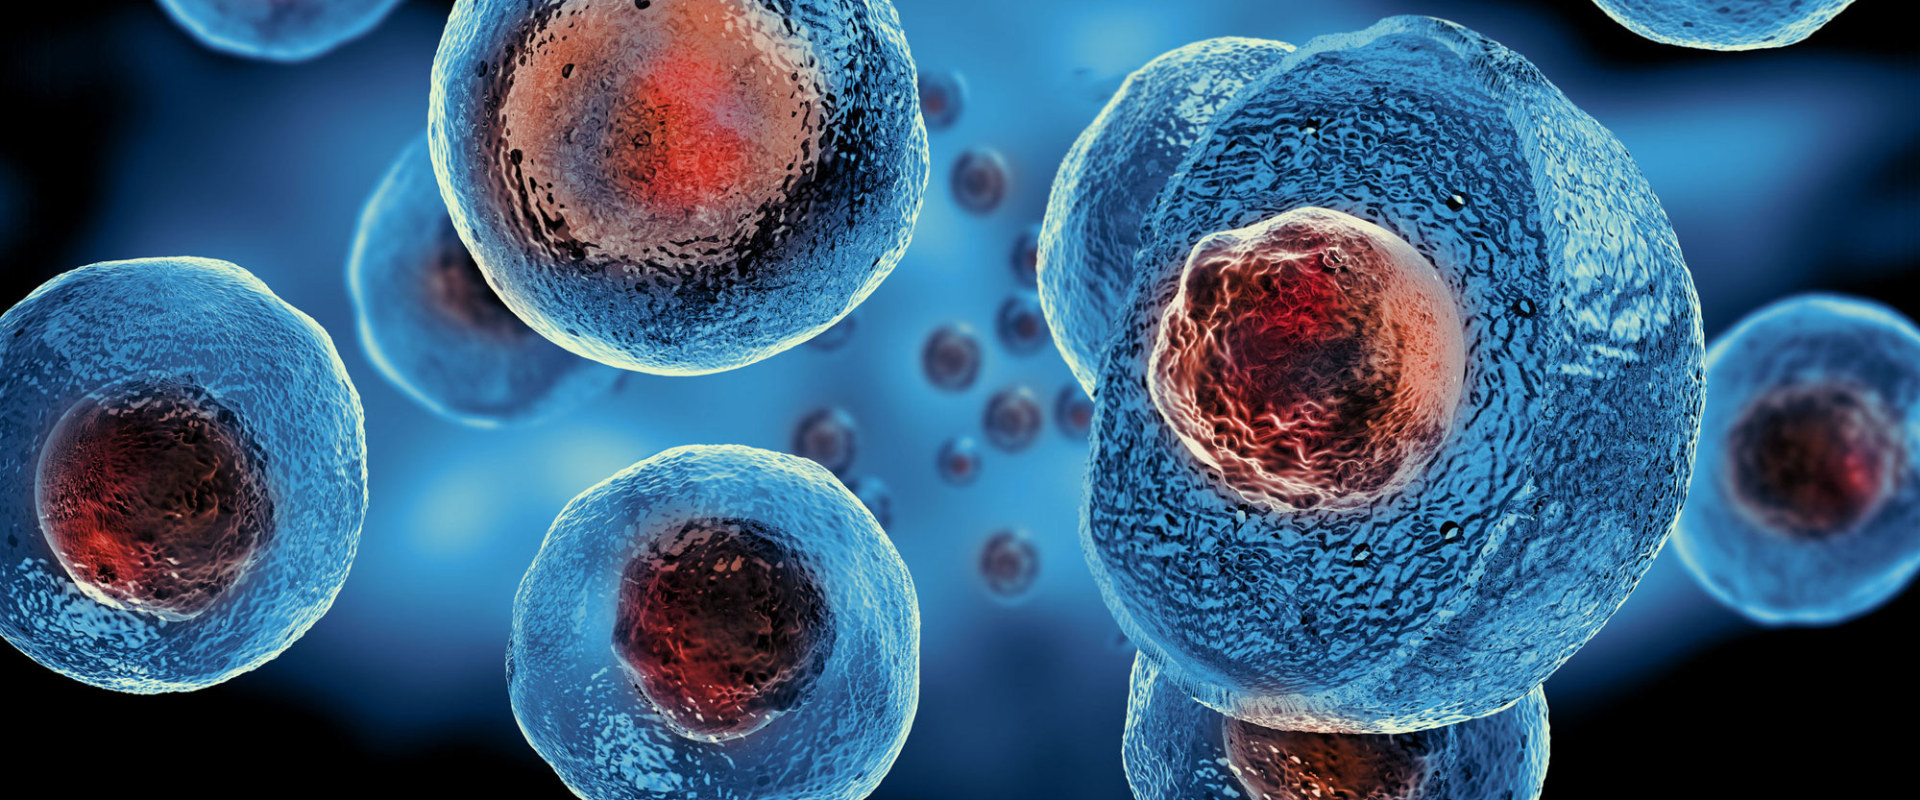 What is the most common stem cell therapy?